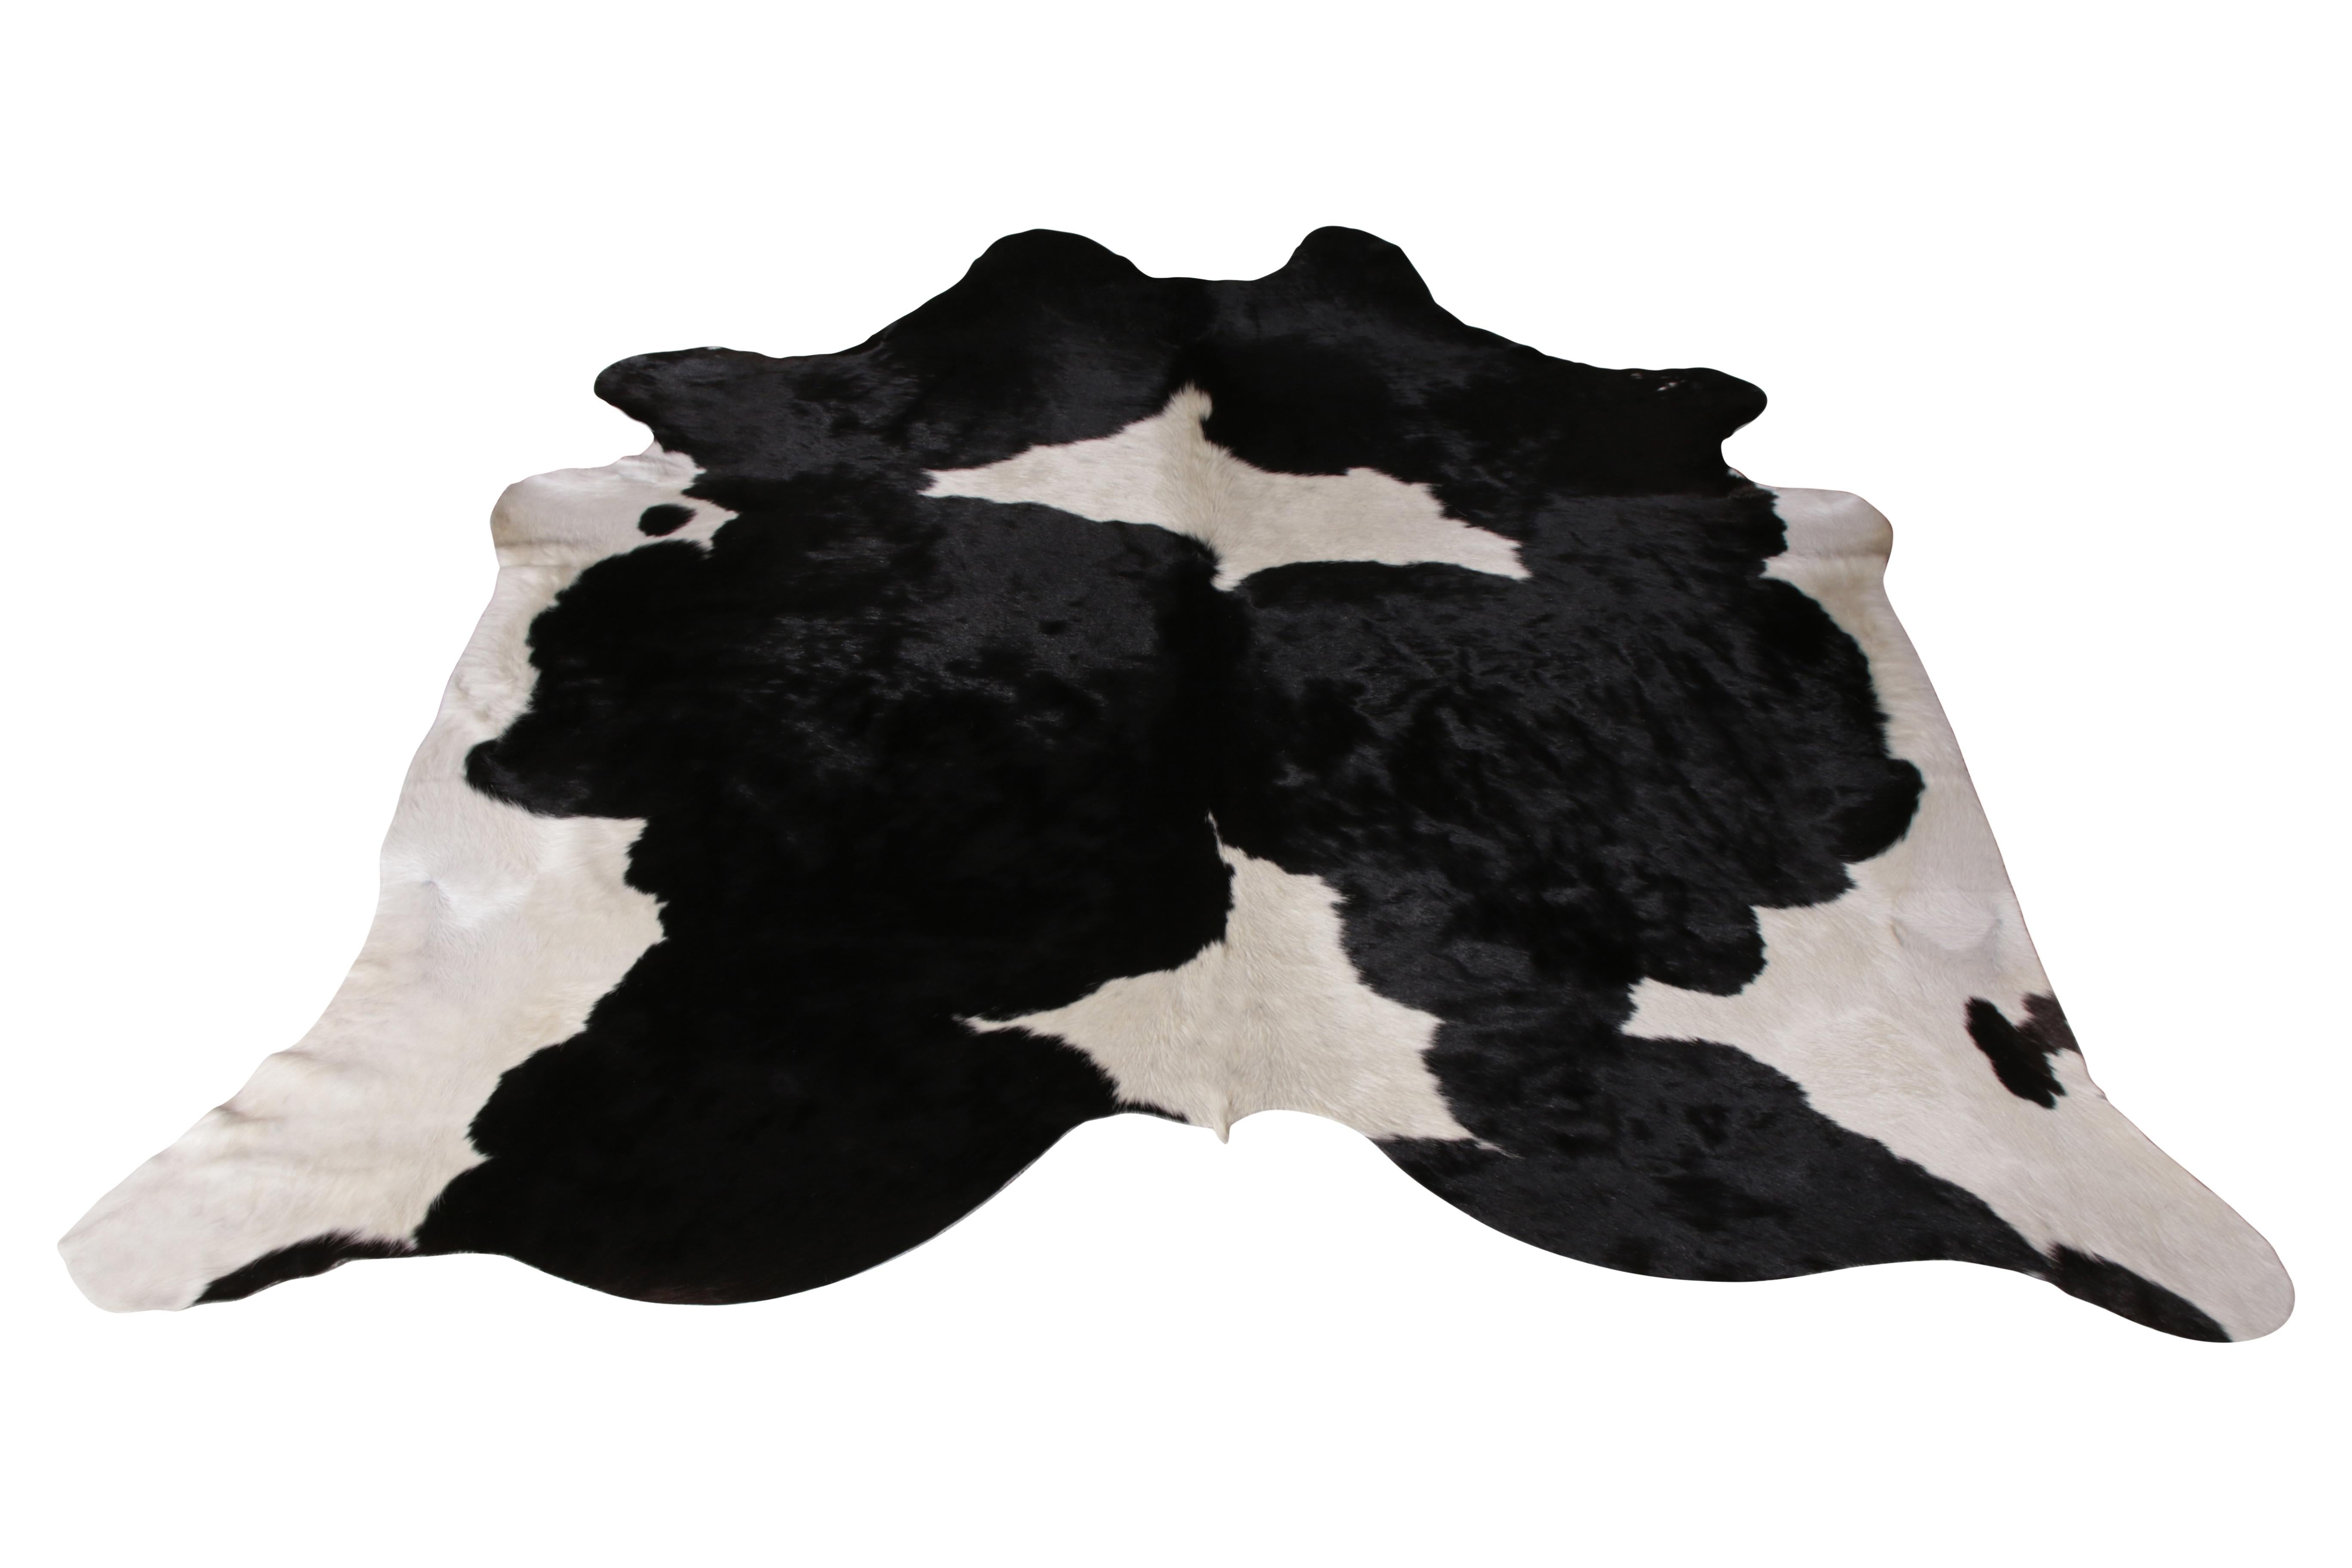 A 7x7 from Rug & Kilim’s line of handmade cowhide rugs. Enjoying a silky, lustrous sheen complementing the positive-negative black and white play with subtle distinction. A comfortable, textural choice, particularly well suited to country homes and